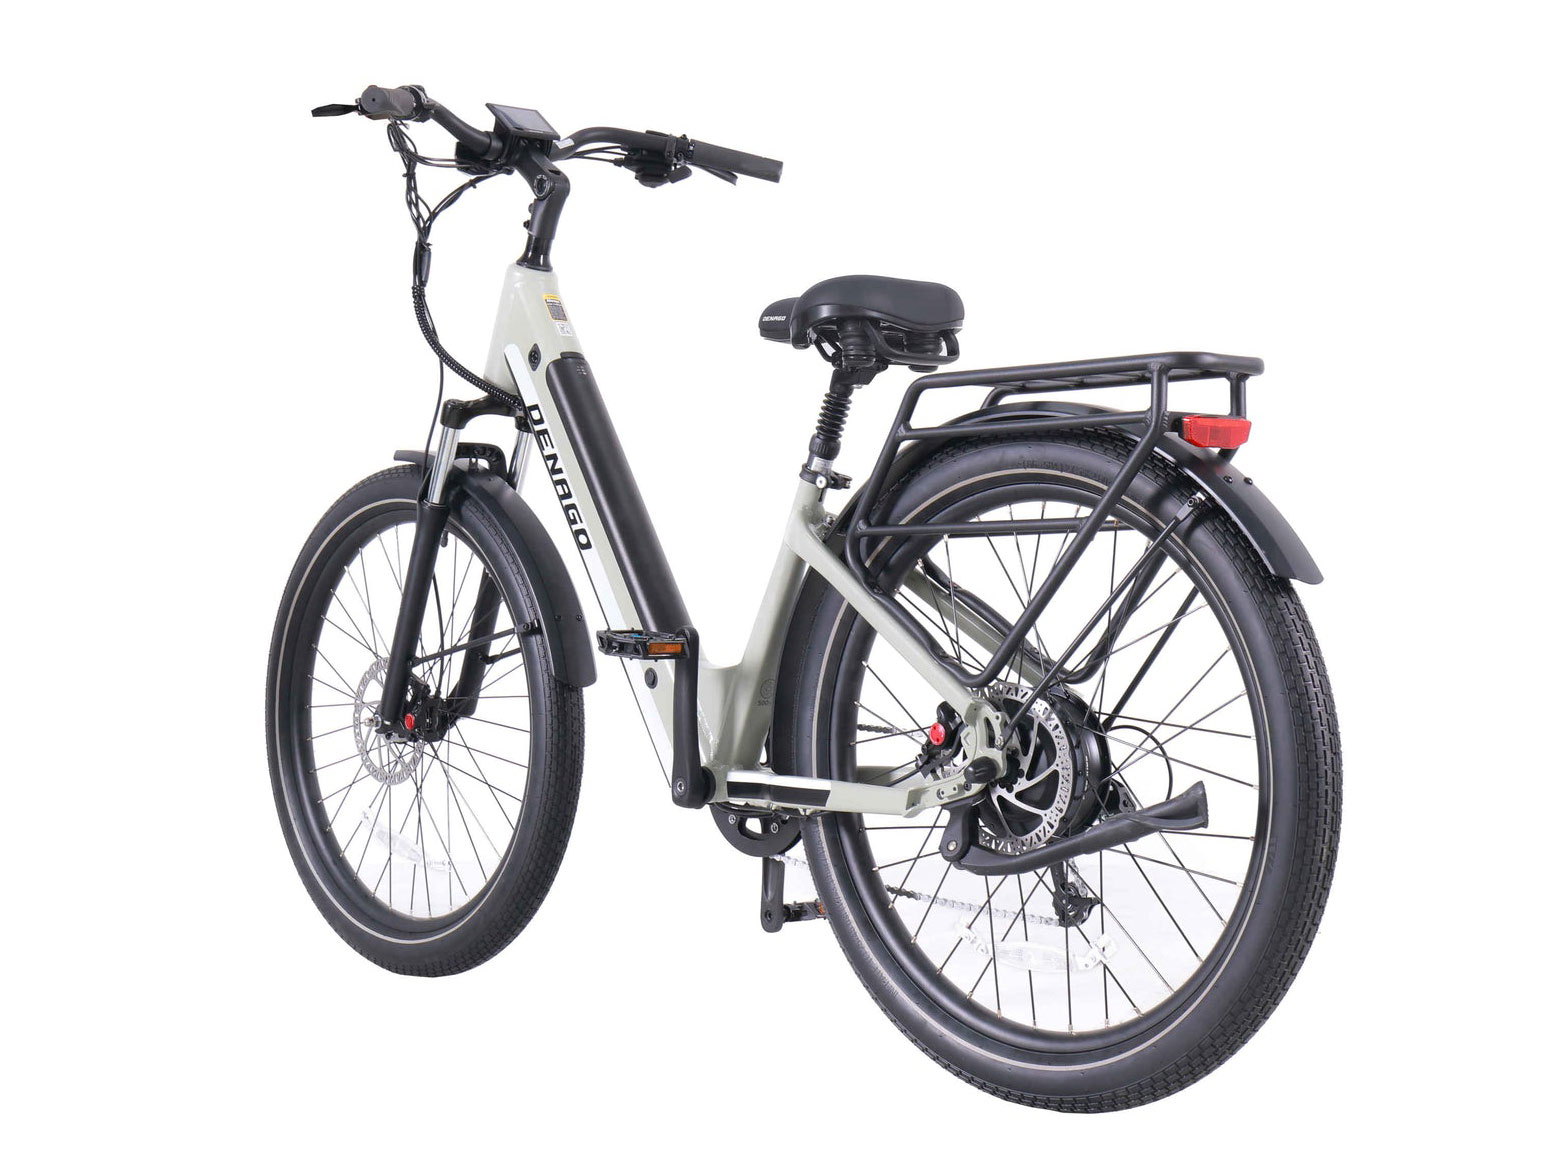 The Commute Model 1 Step-Thru is available for $1,999 at Bike.com and through authorized Denago dealers.